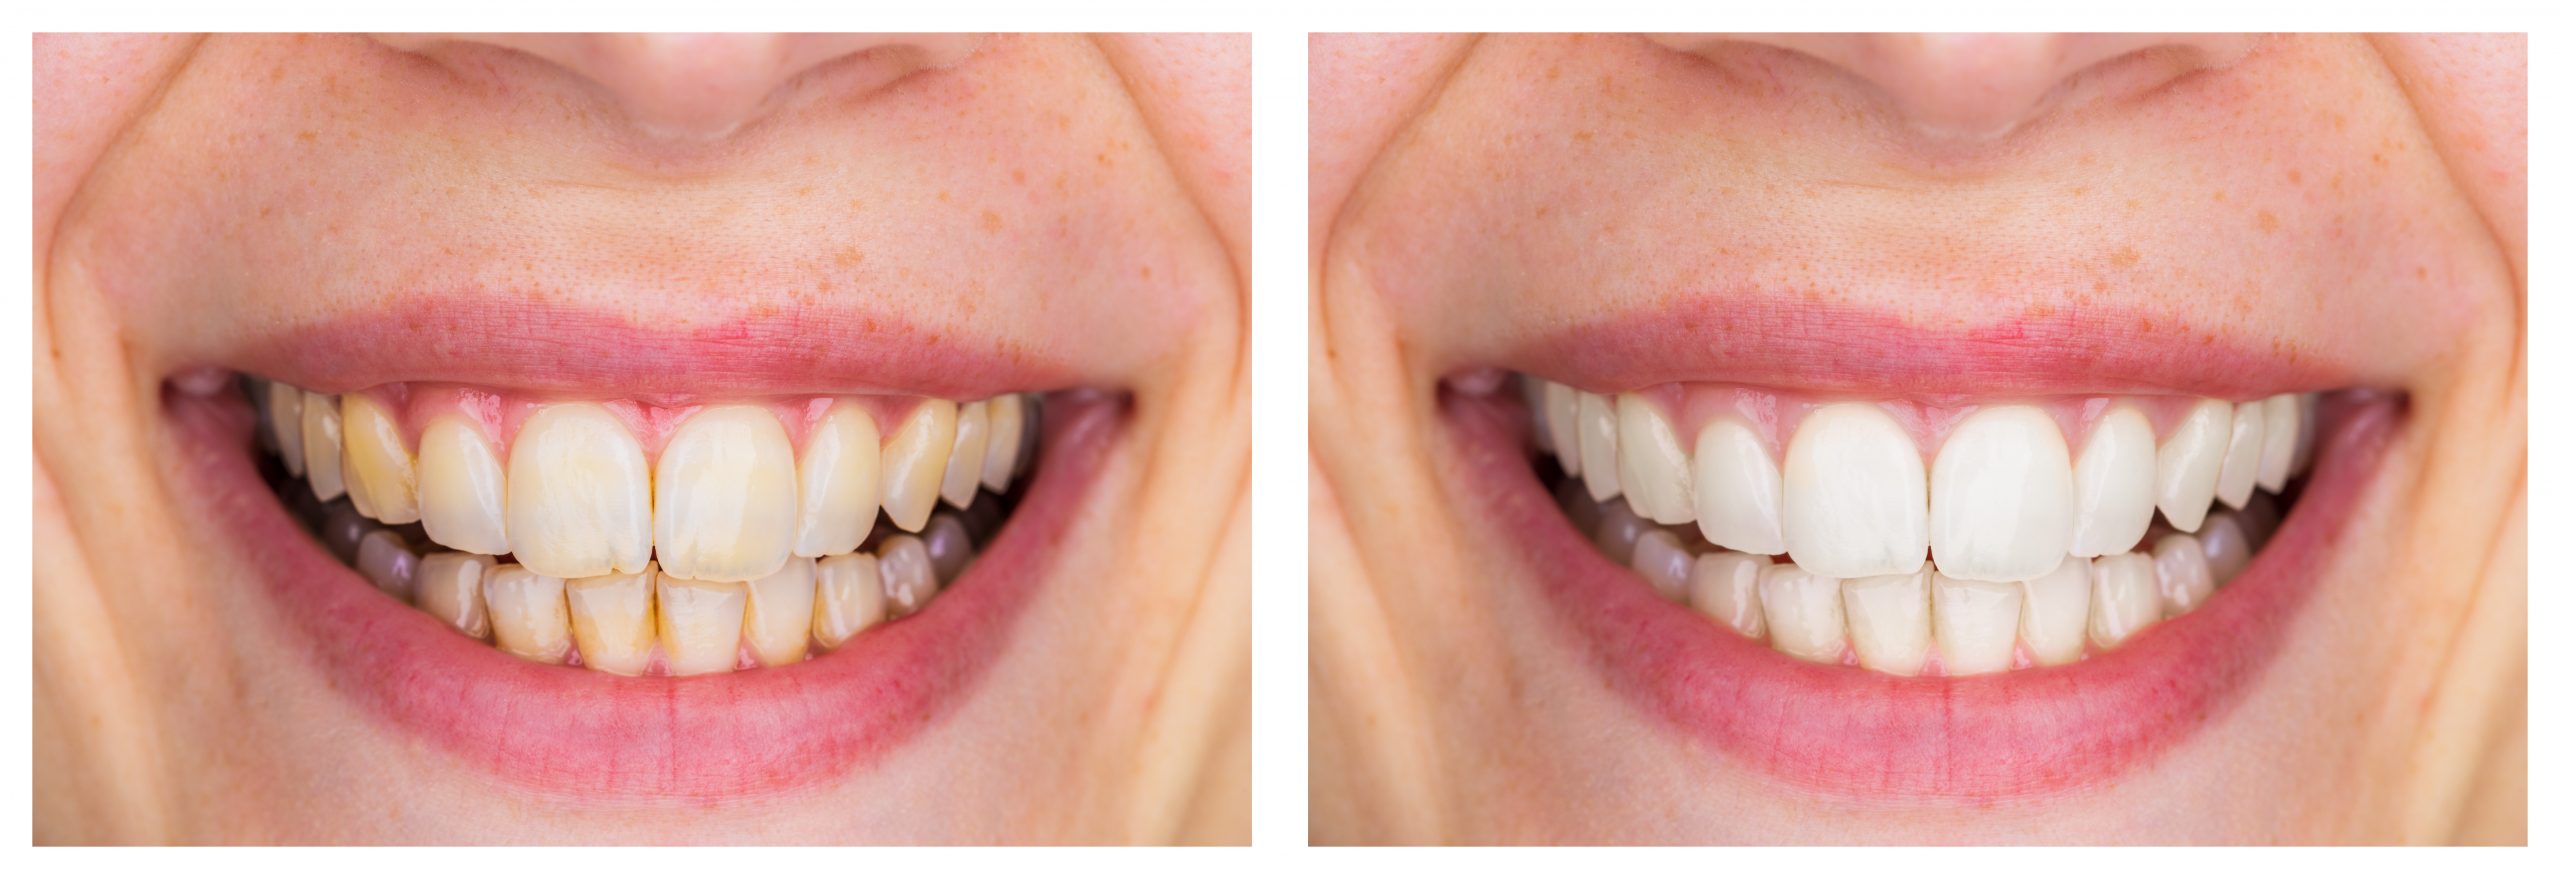 Teeth Whitening Before   After Aug Blog Scaled